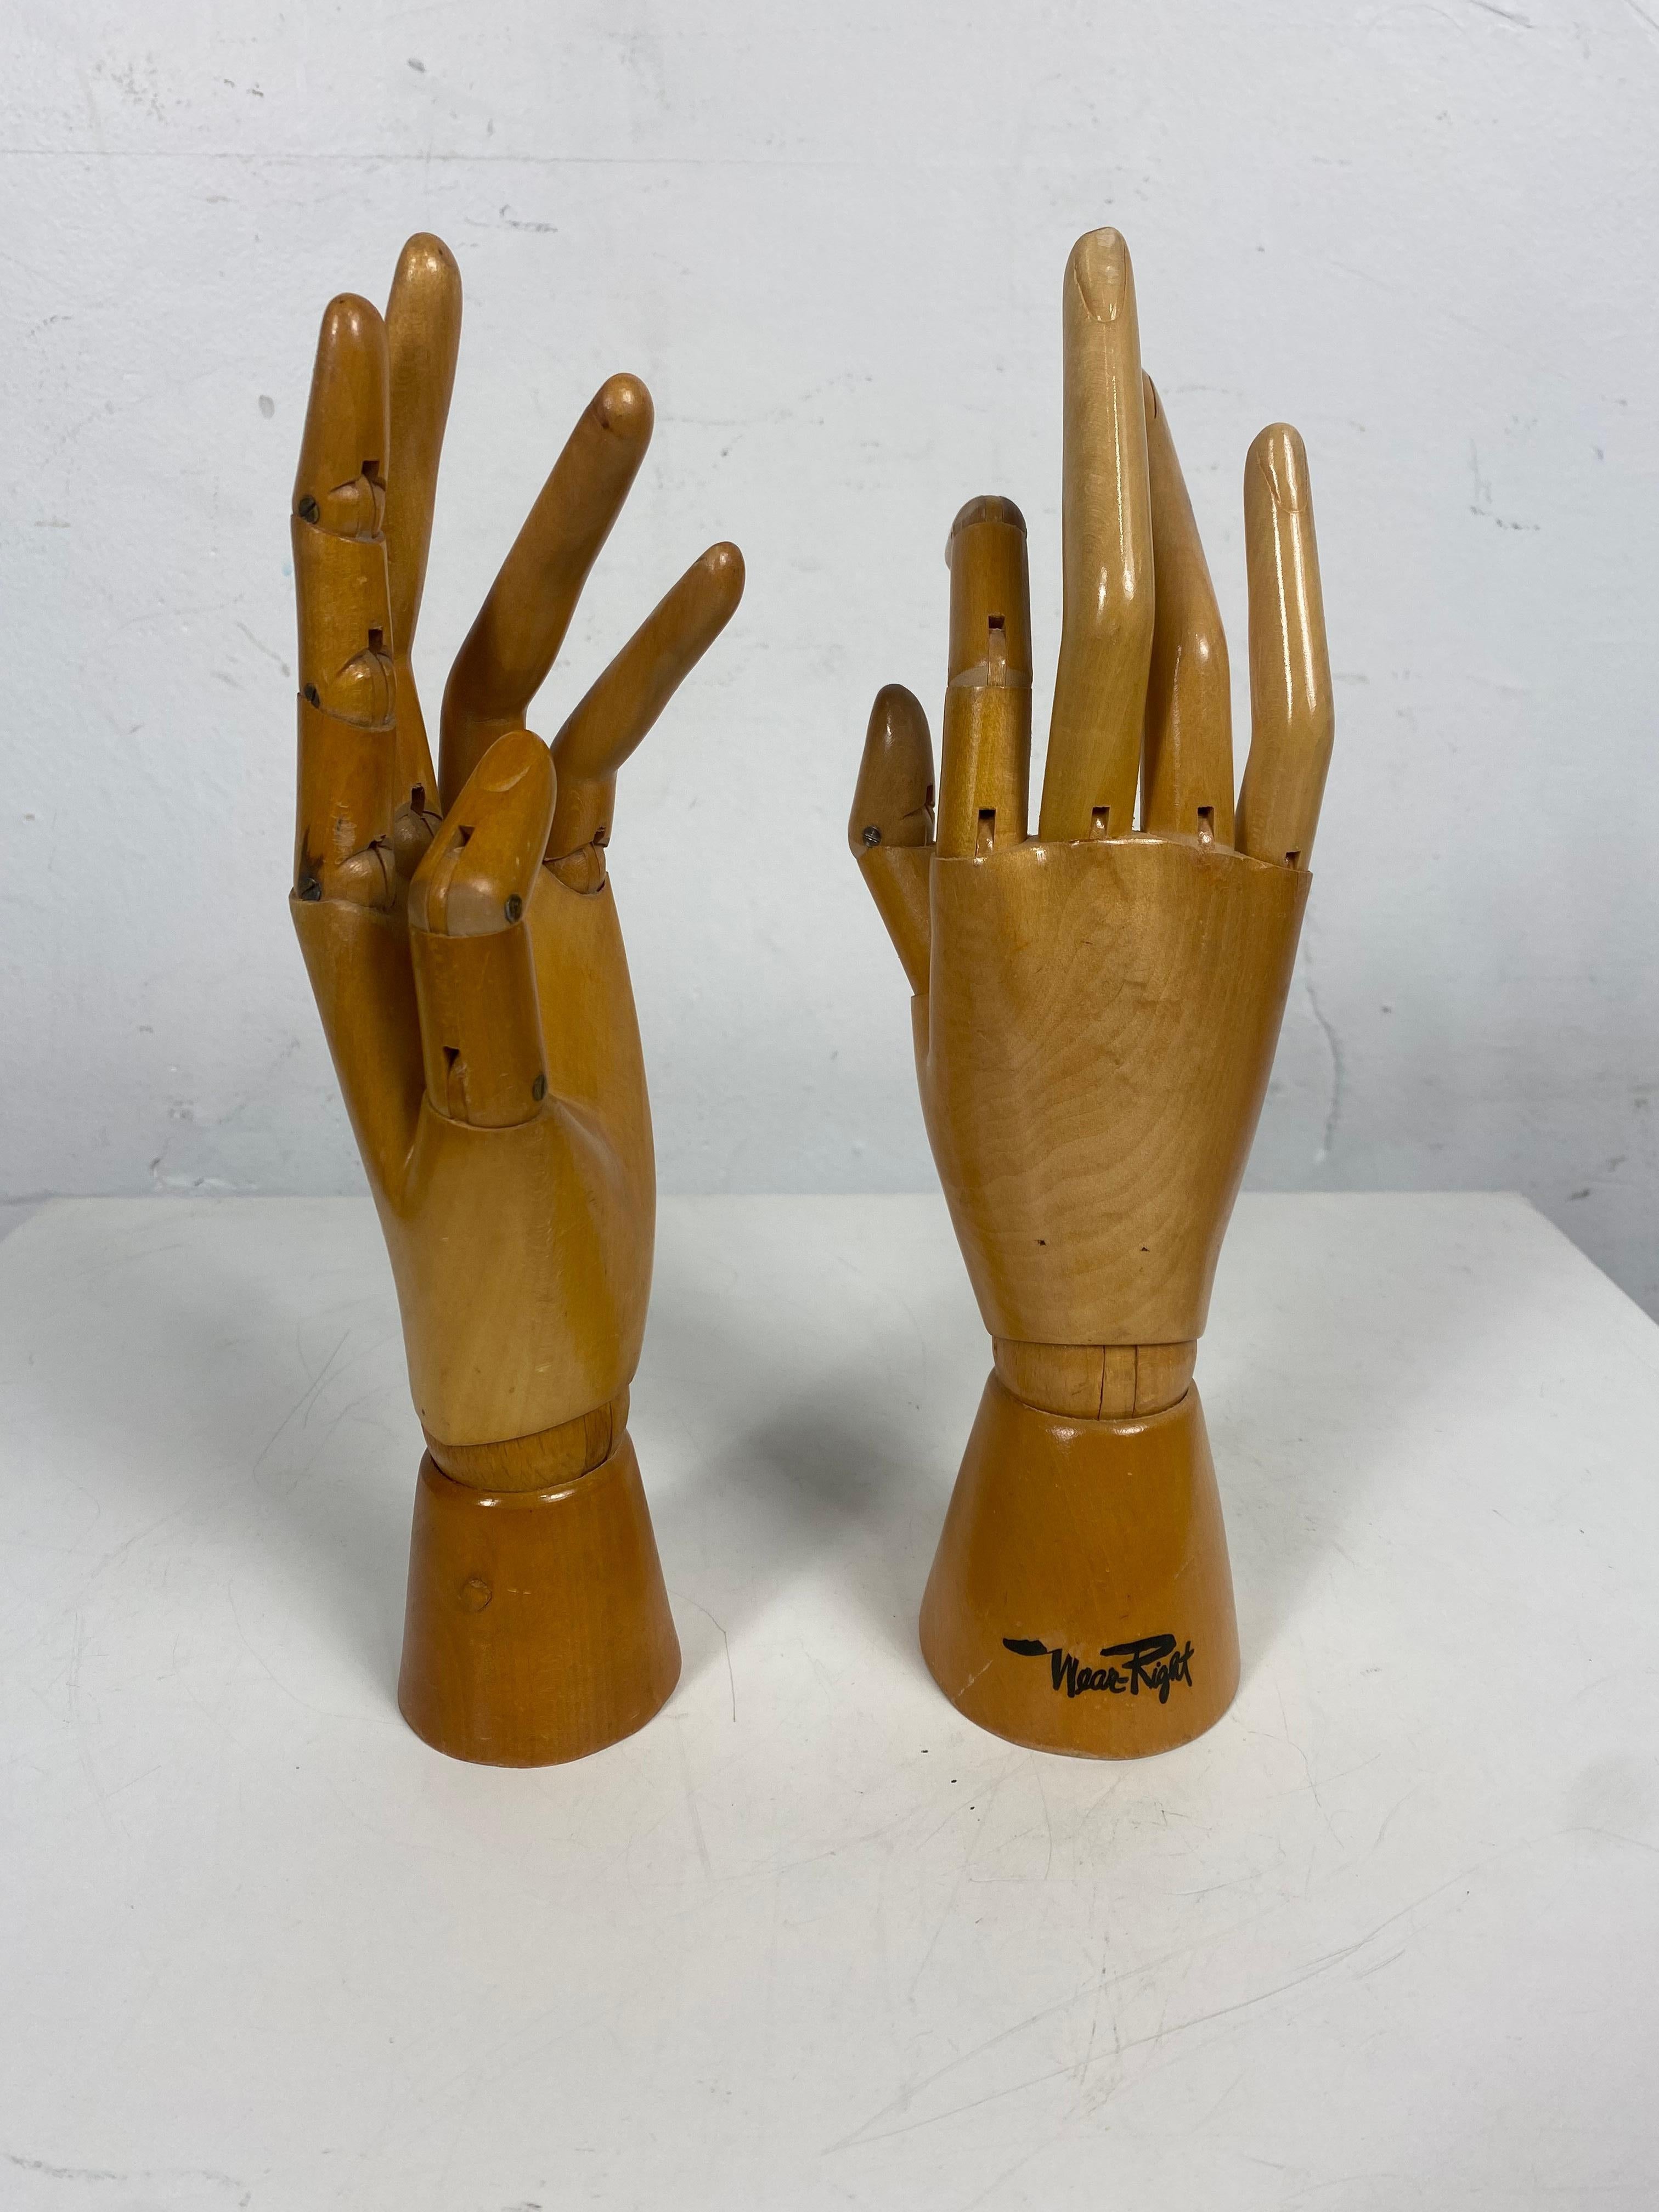 Carved 1930s/ 1940s Articulated Wooden Hands, Artist Model, Drawing Tool, Belgium